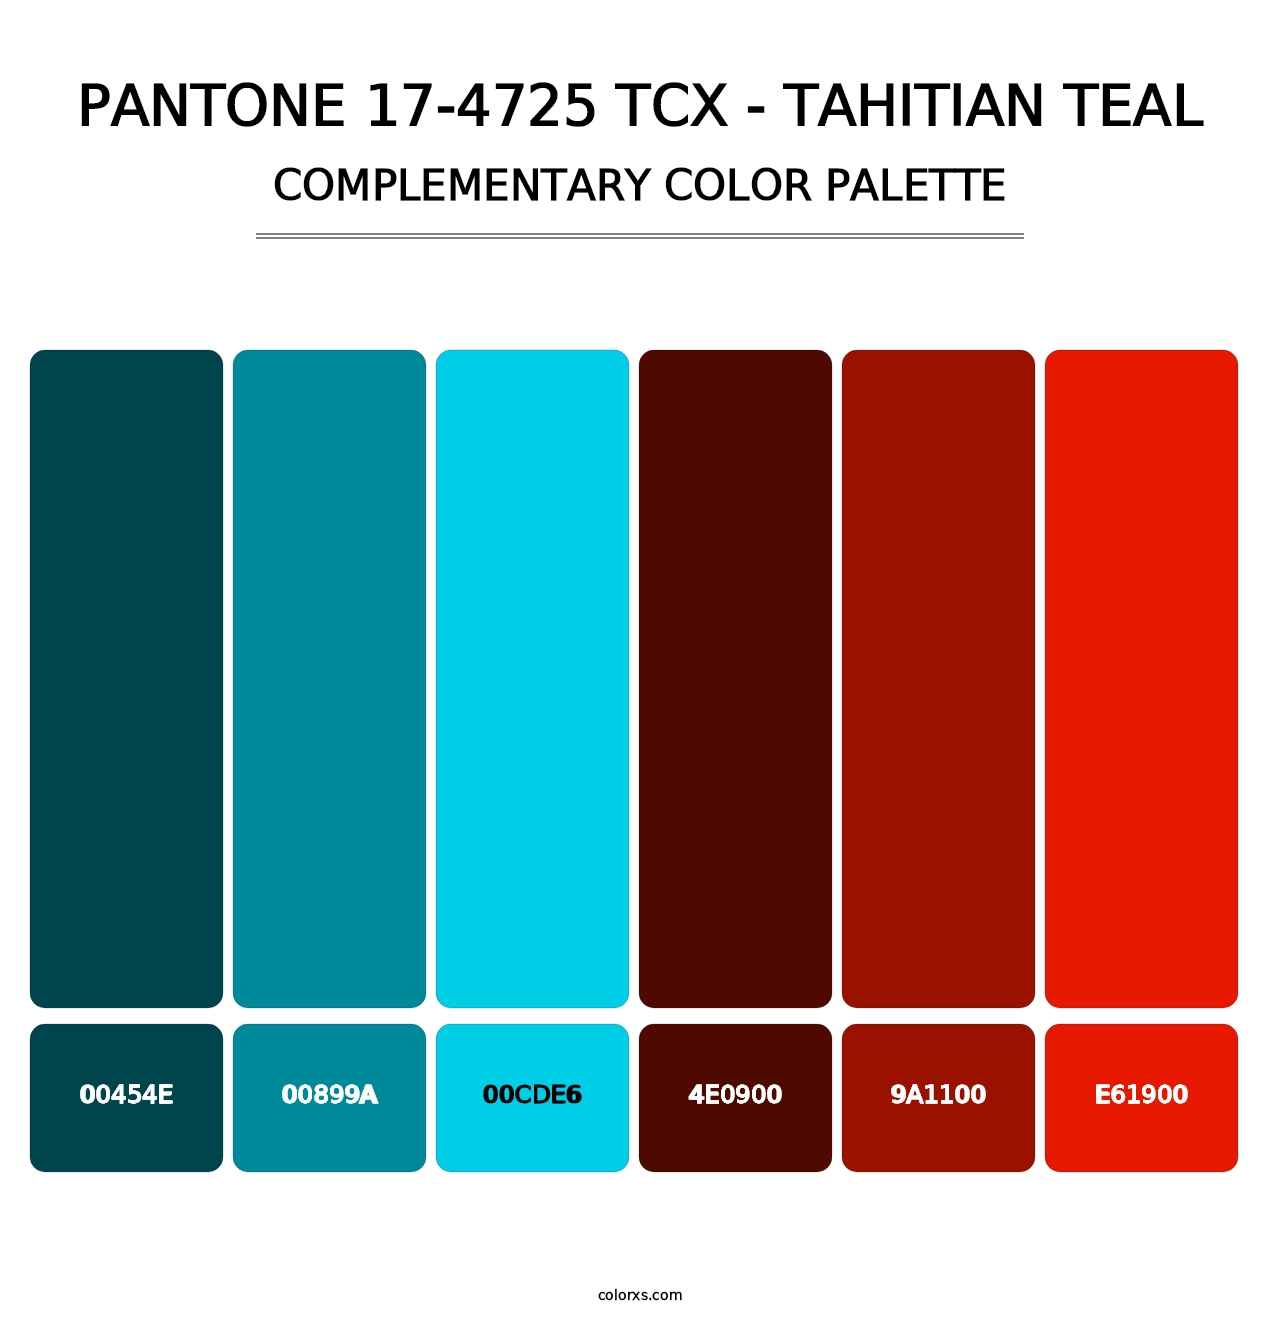 PANTONE 17-4725 TCX - Tahitian Teal - Complementary Color Palette